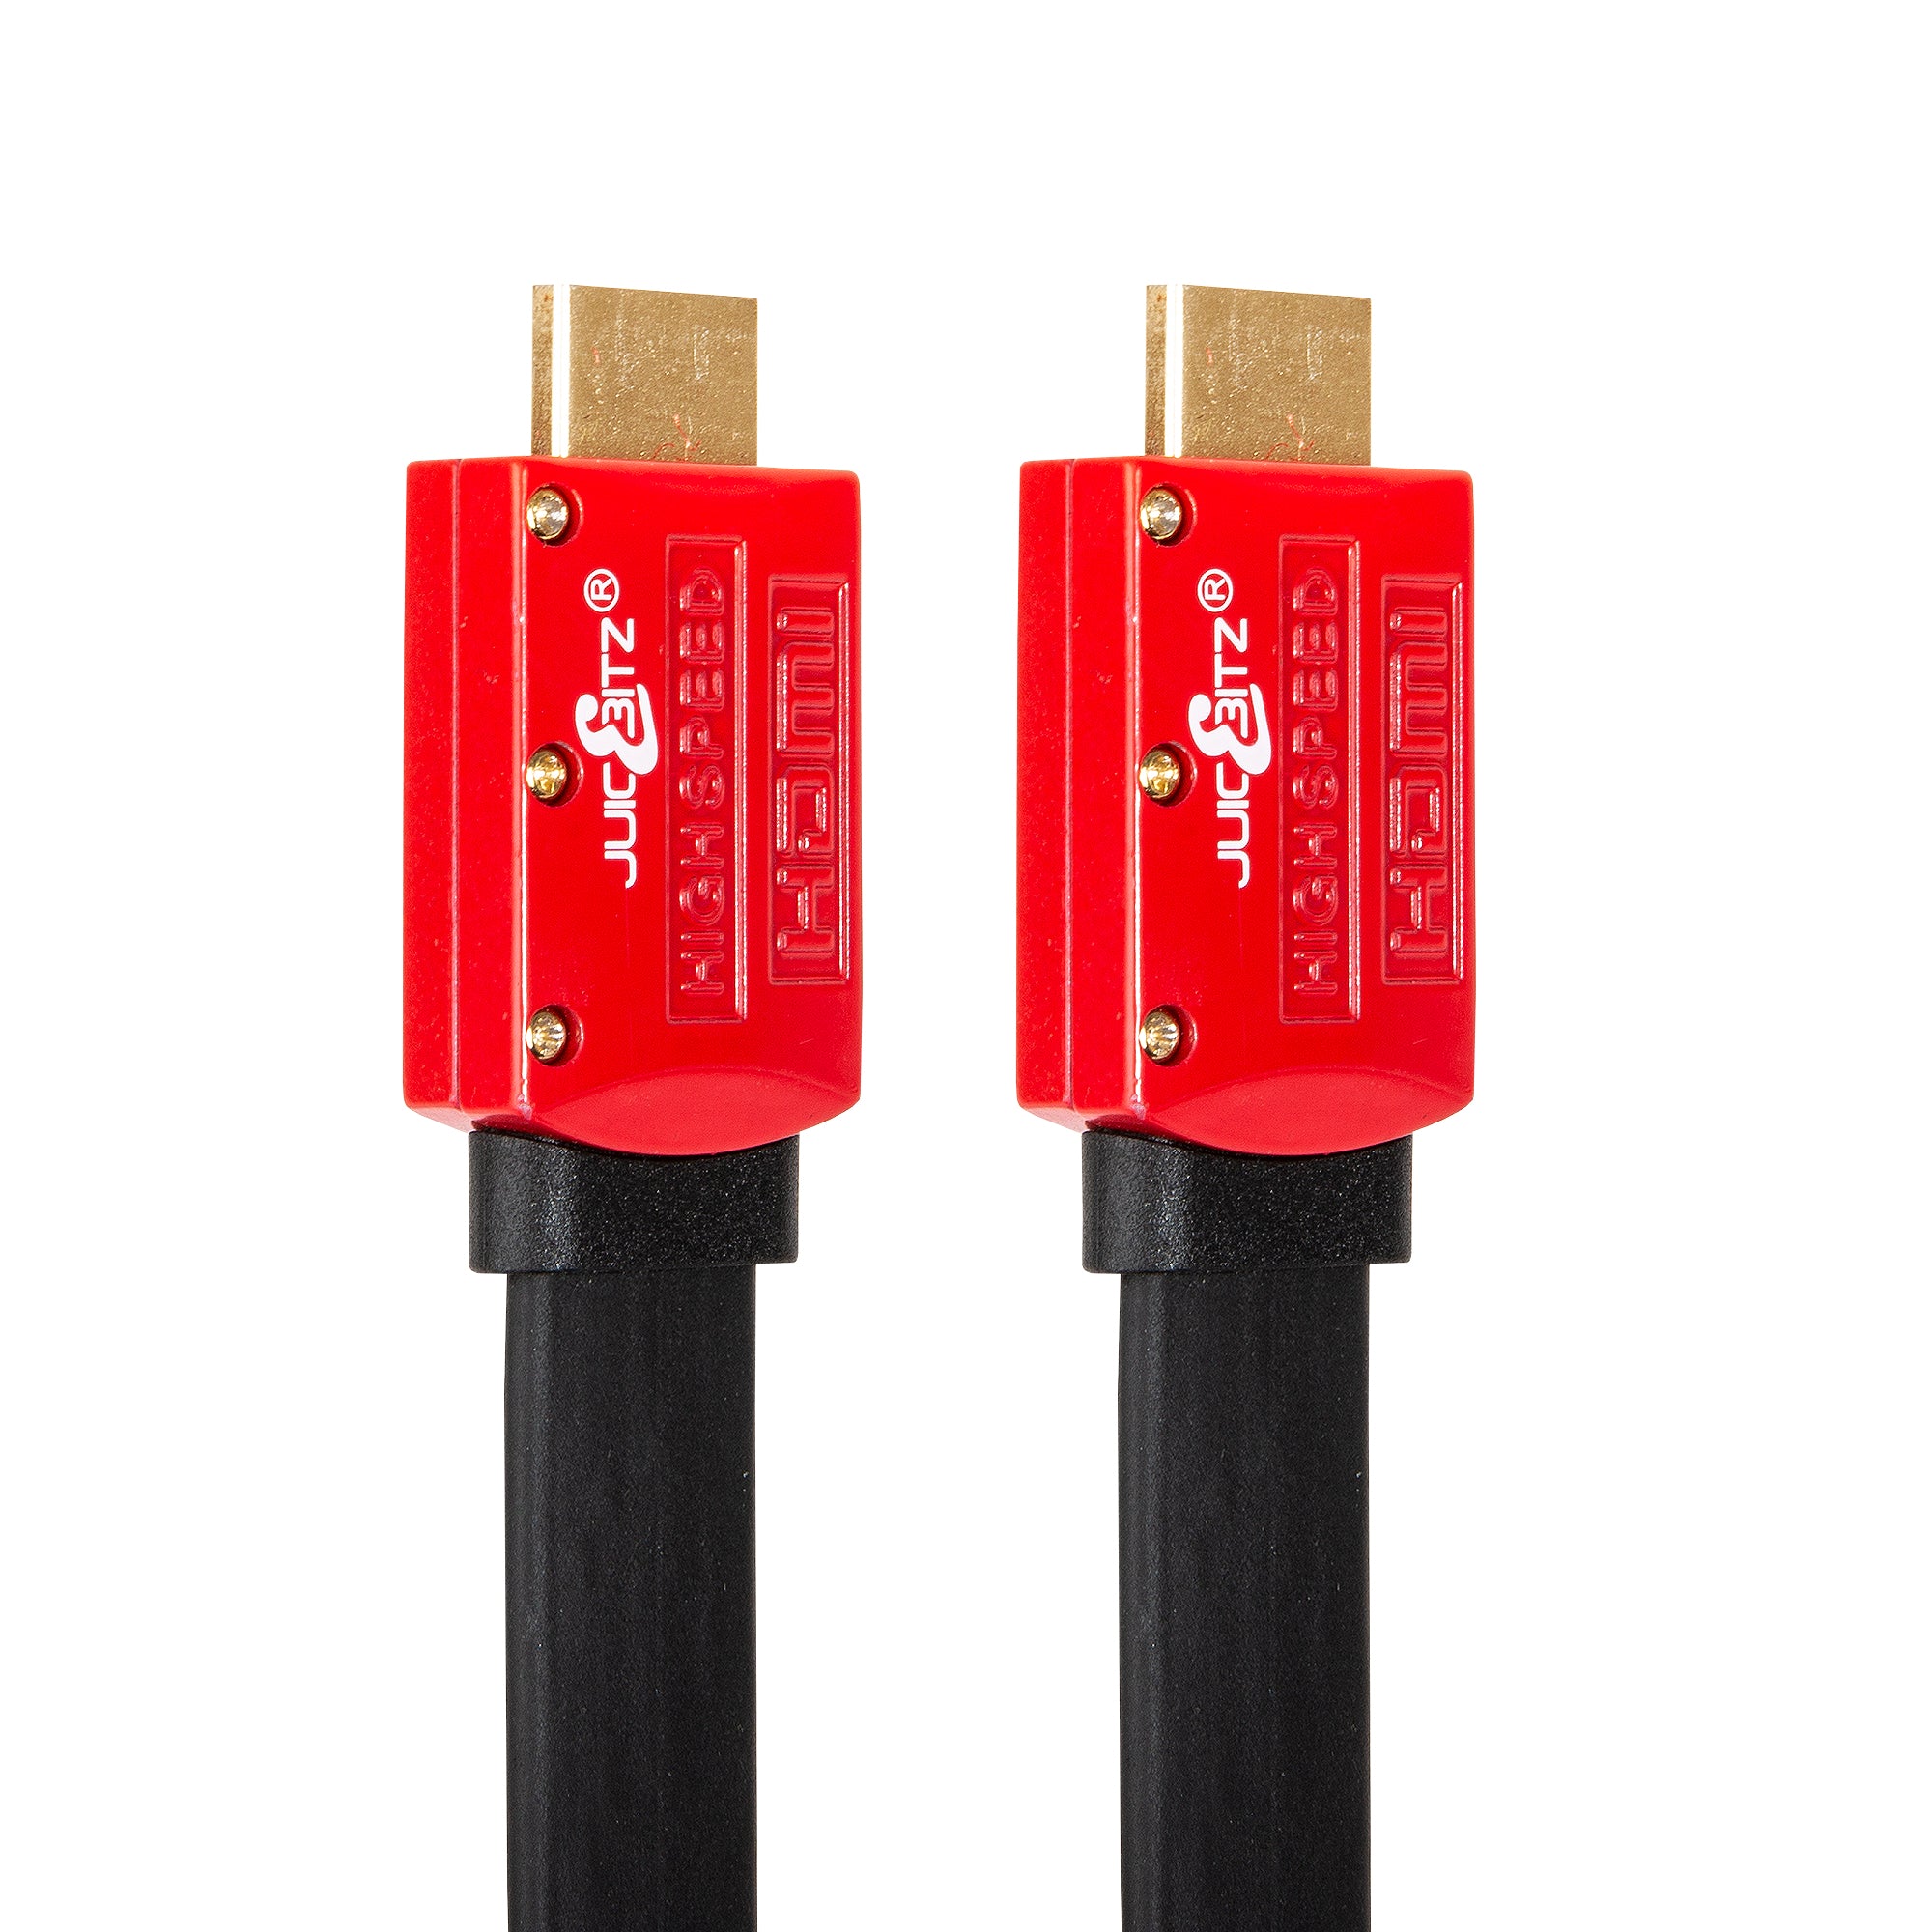 12m PS4 HDMI Cable - Super Speed S1